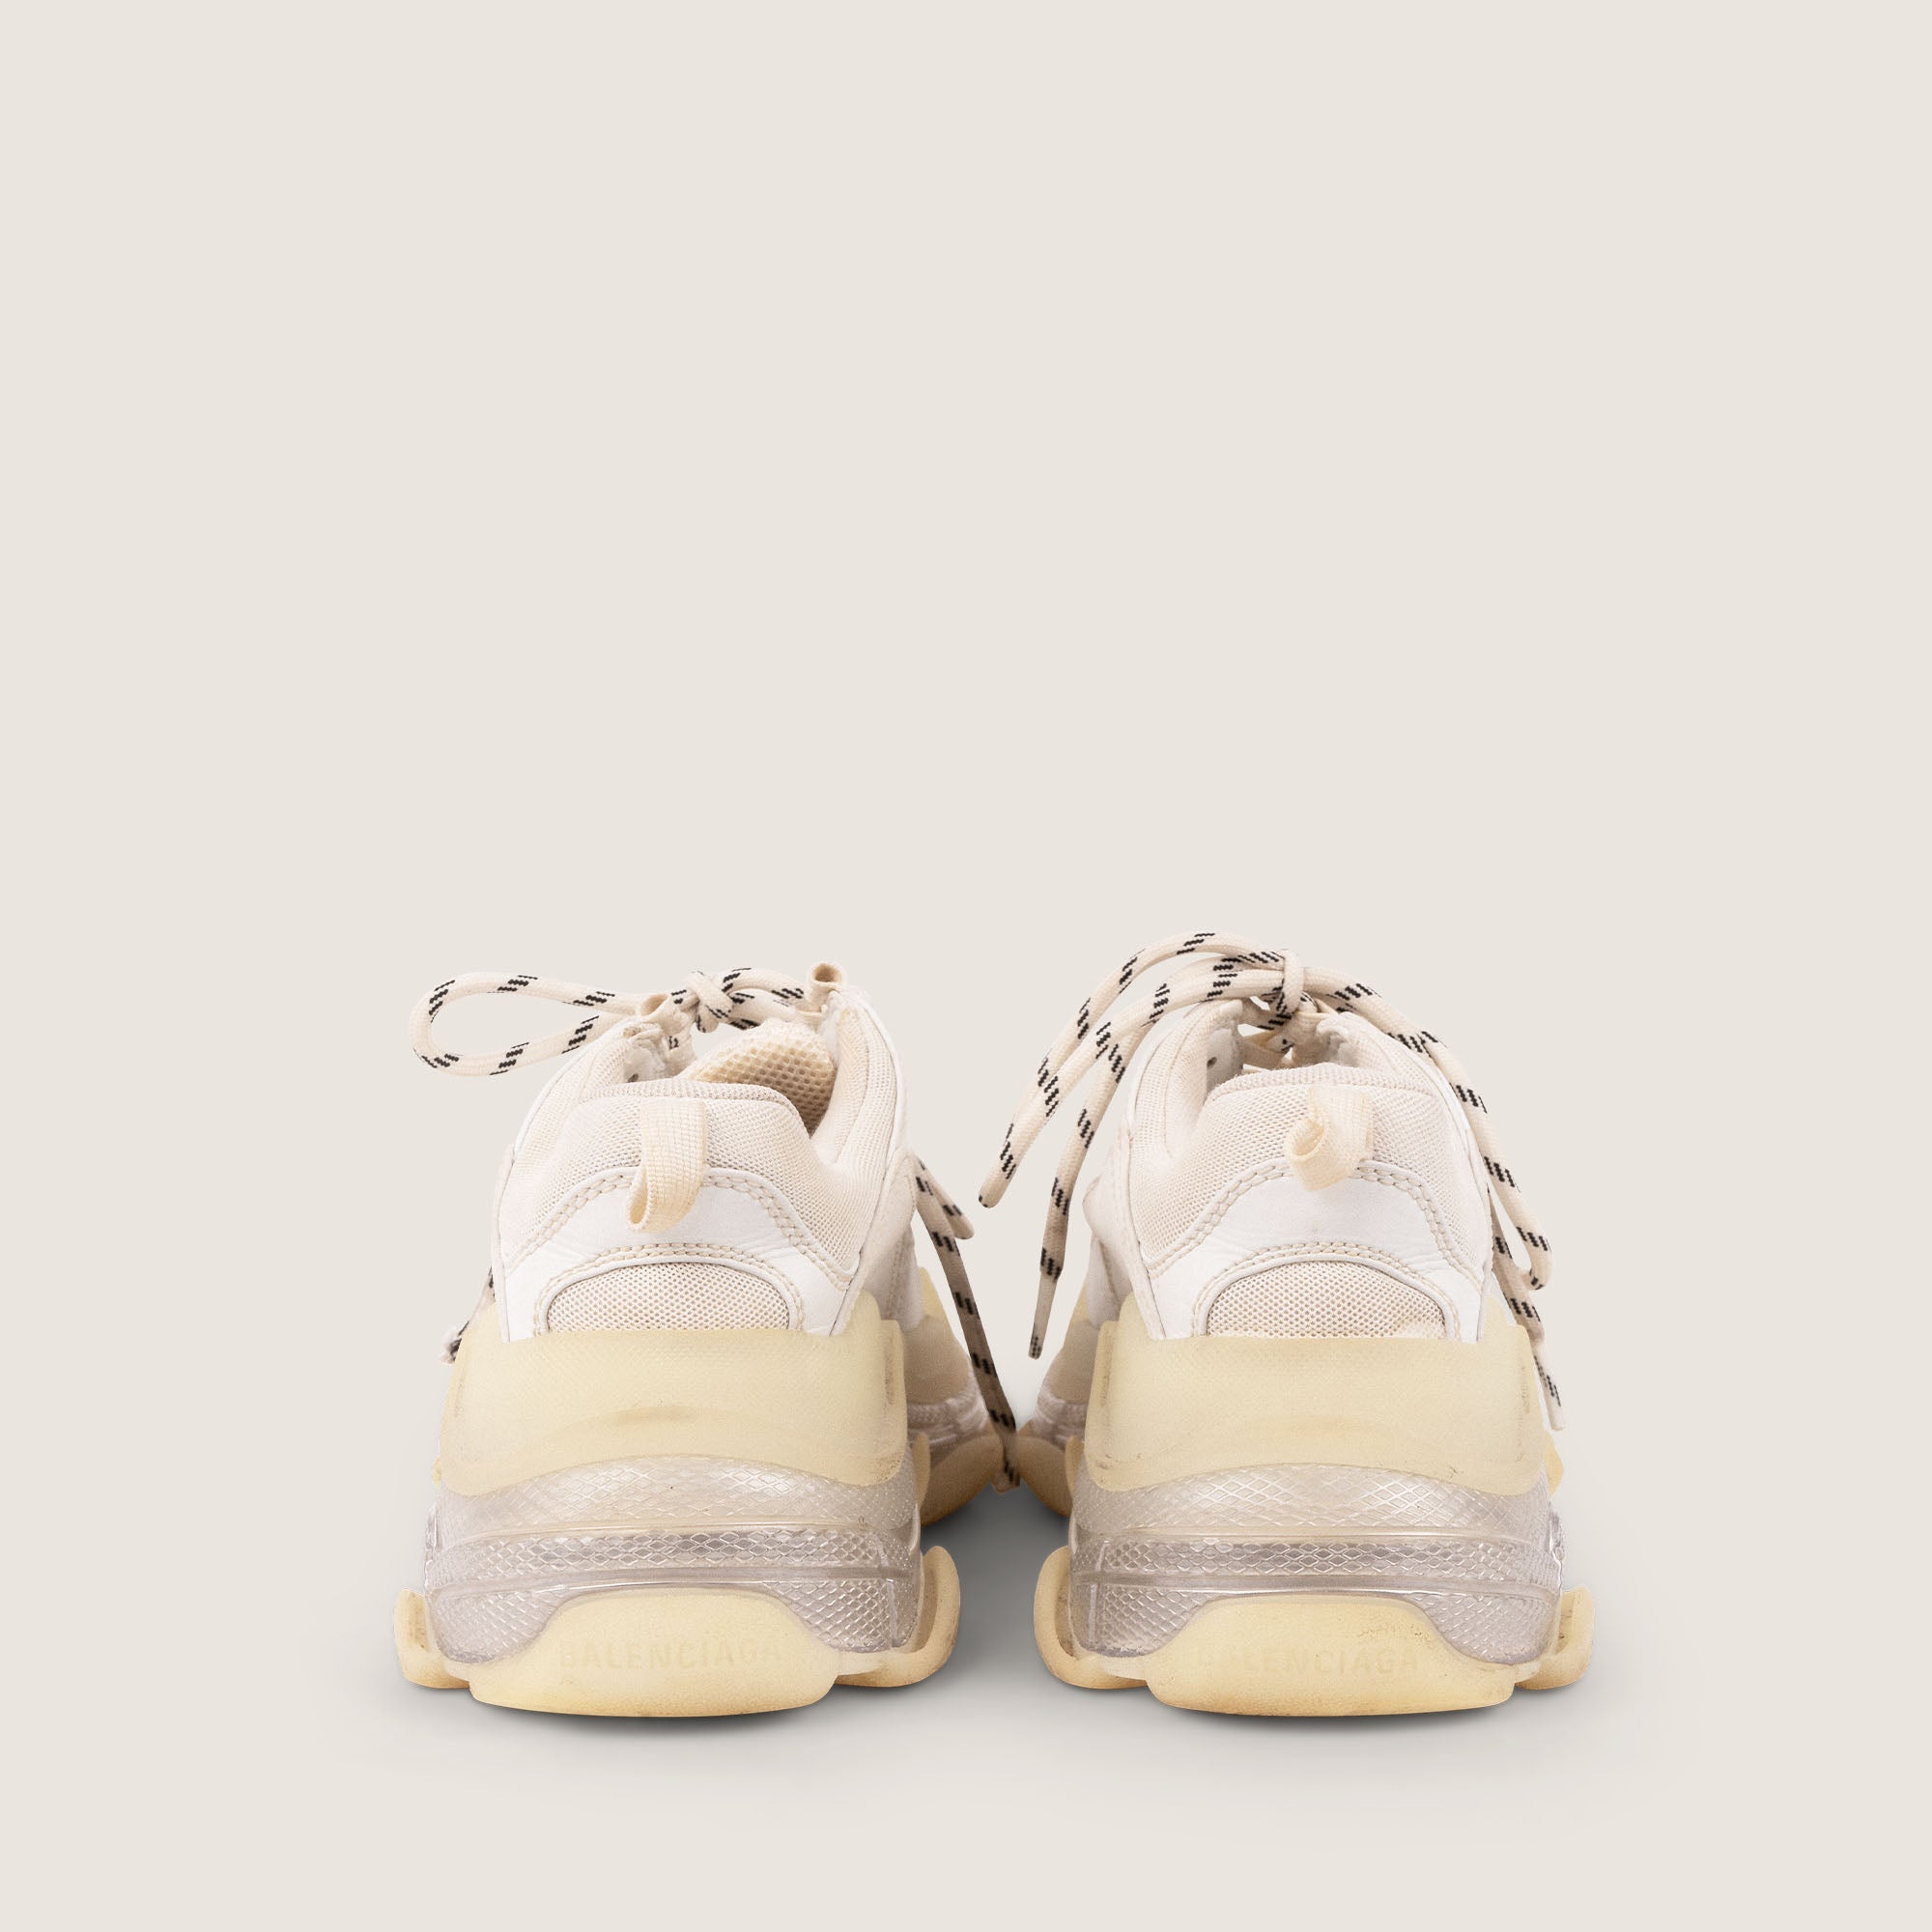 Triple S Sneakers 38 - BALENCIAGA - Affordable Luxury image